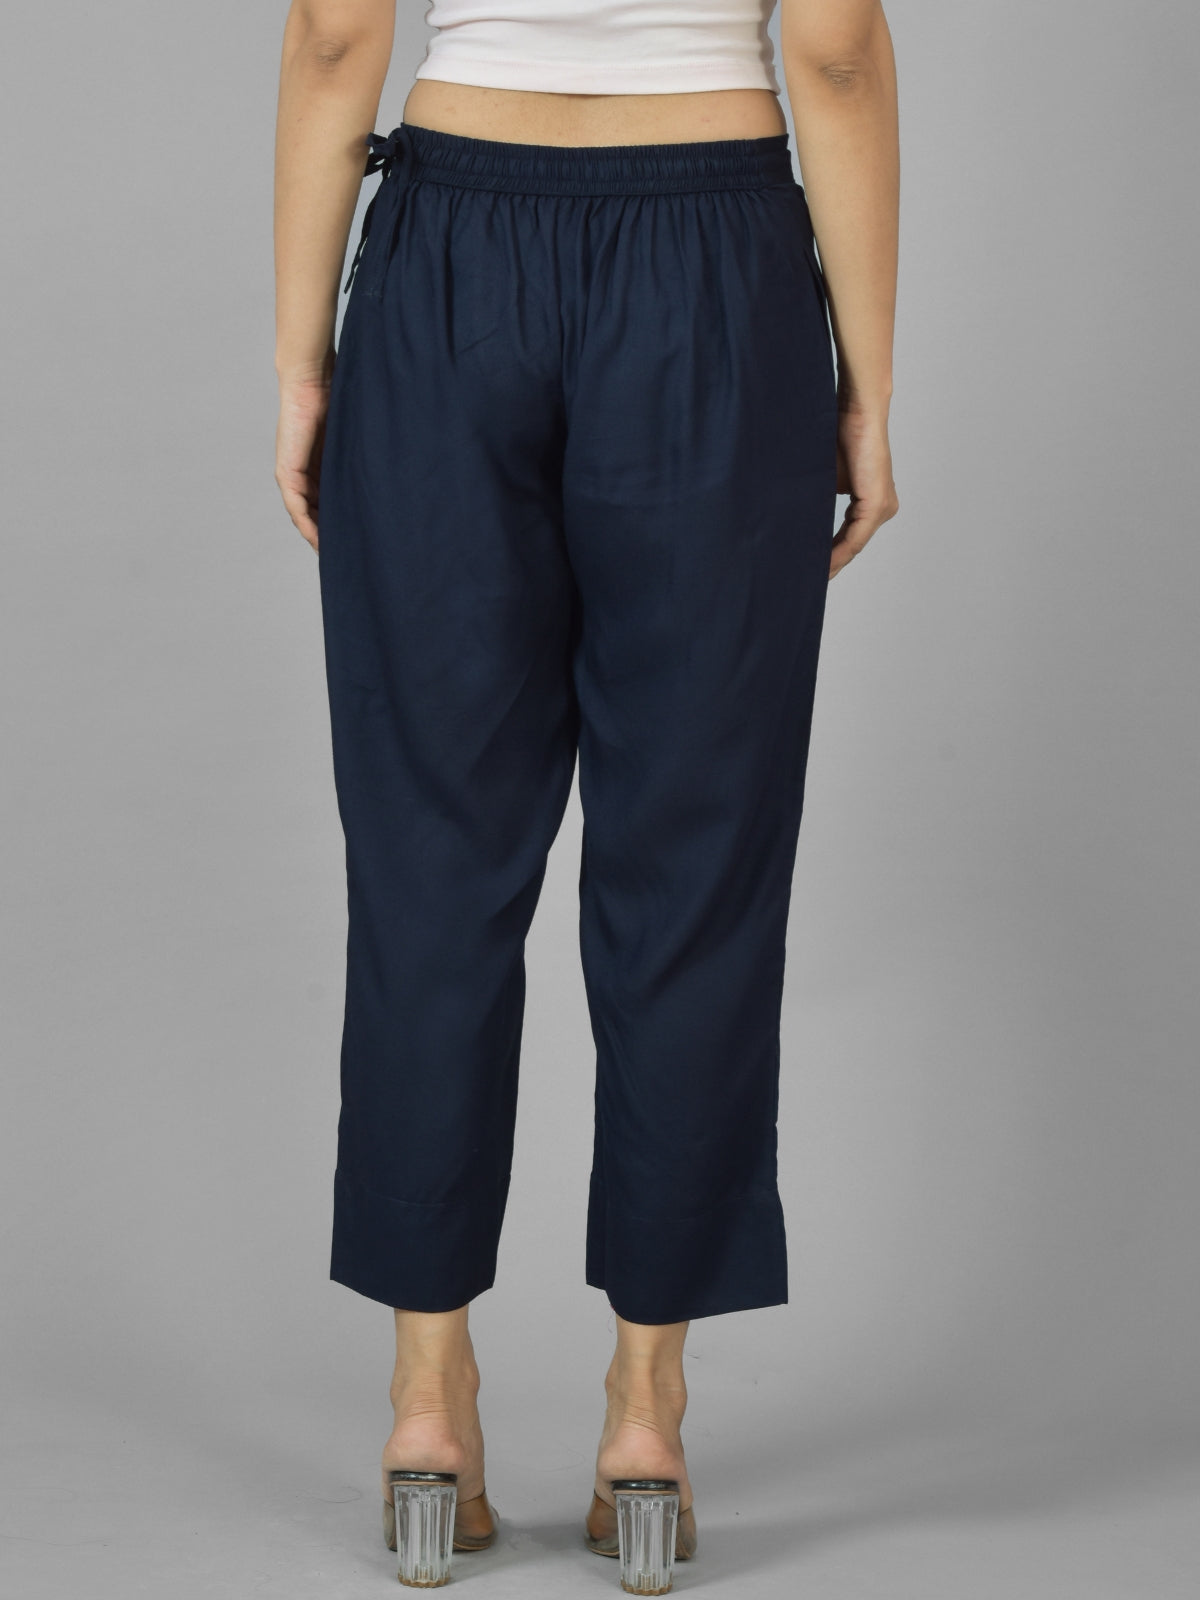 Women Solid Navy Blue Rayon Culottes Trouser